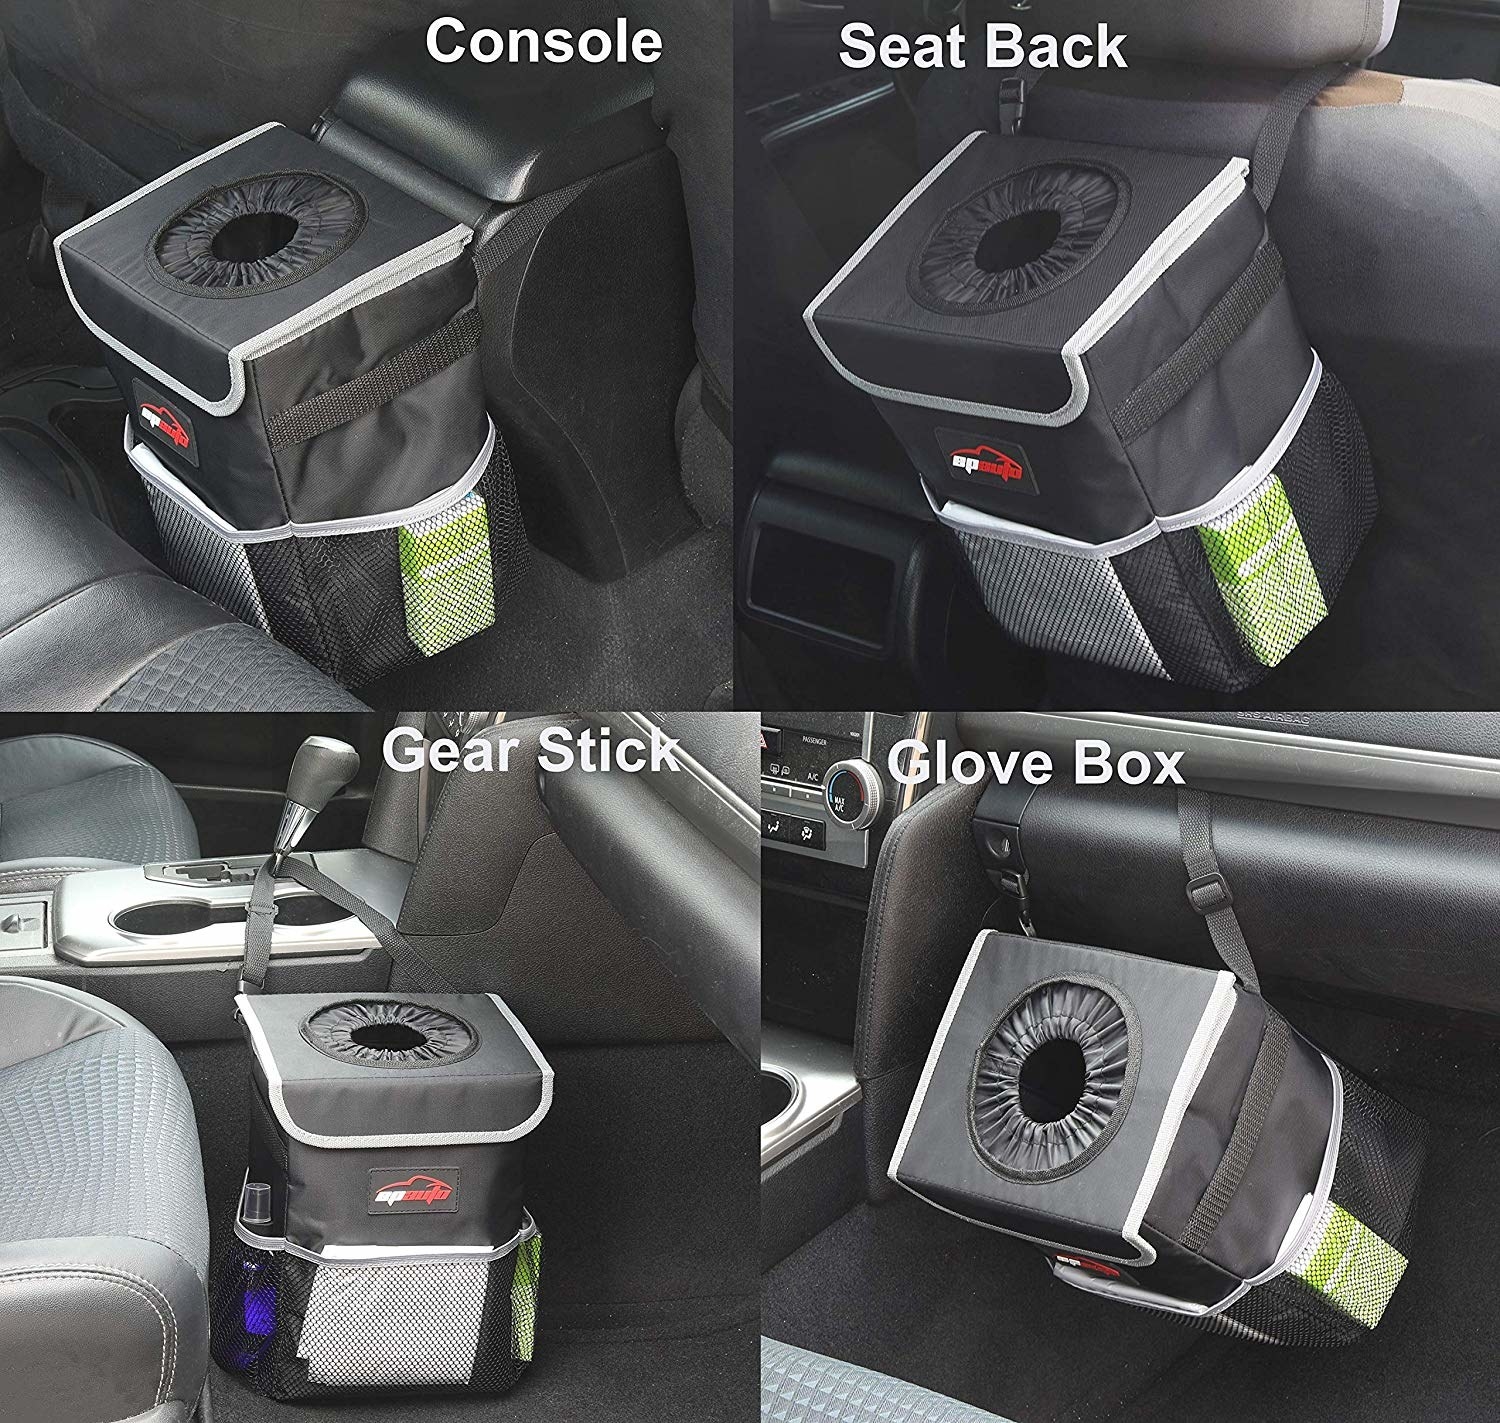 four images showing the trash can hanging from the center console, hanging from a seat back, hanging on the gear stick, and hanging from the glove box